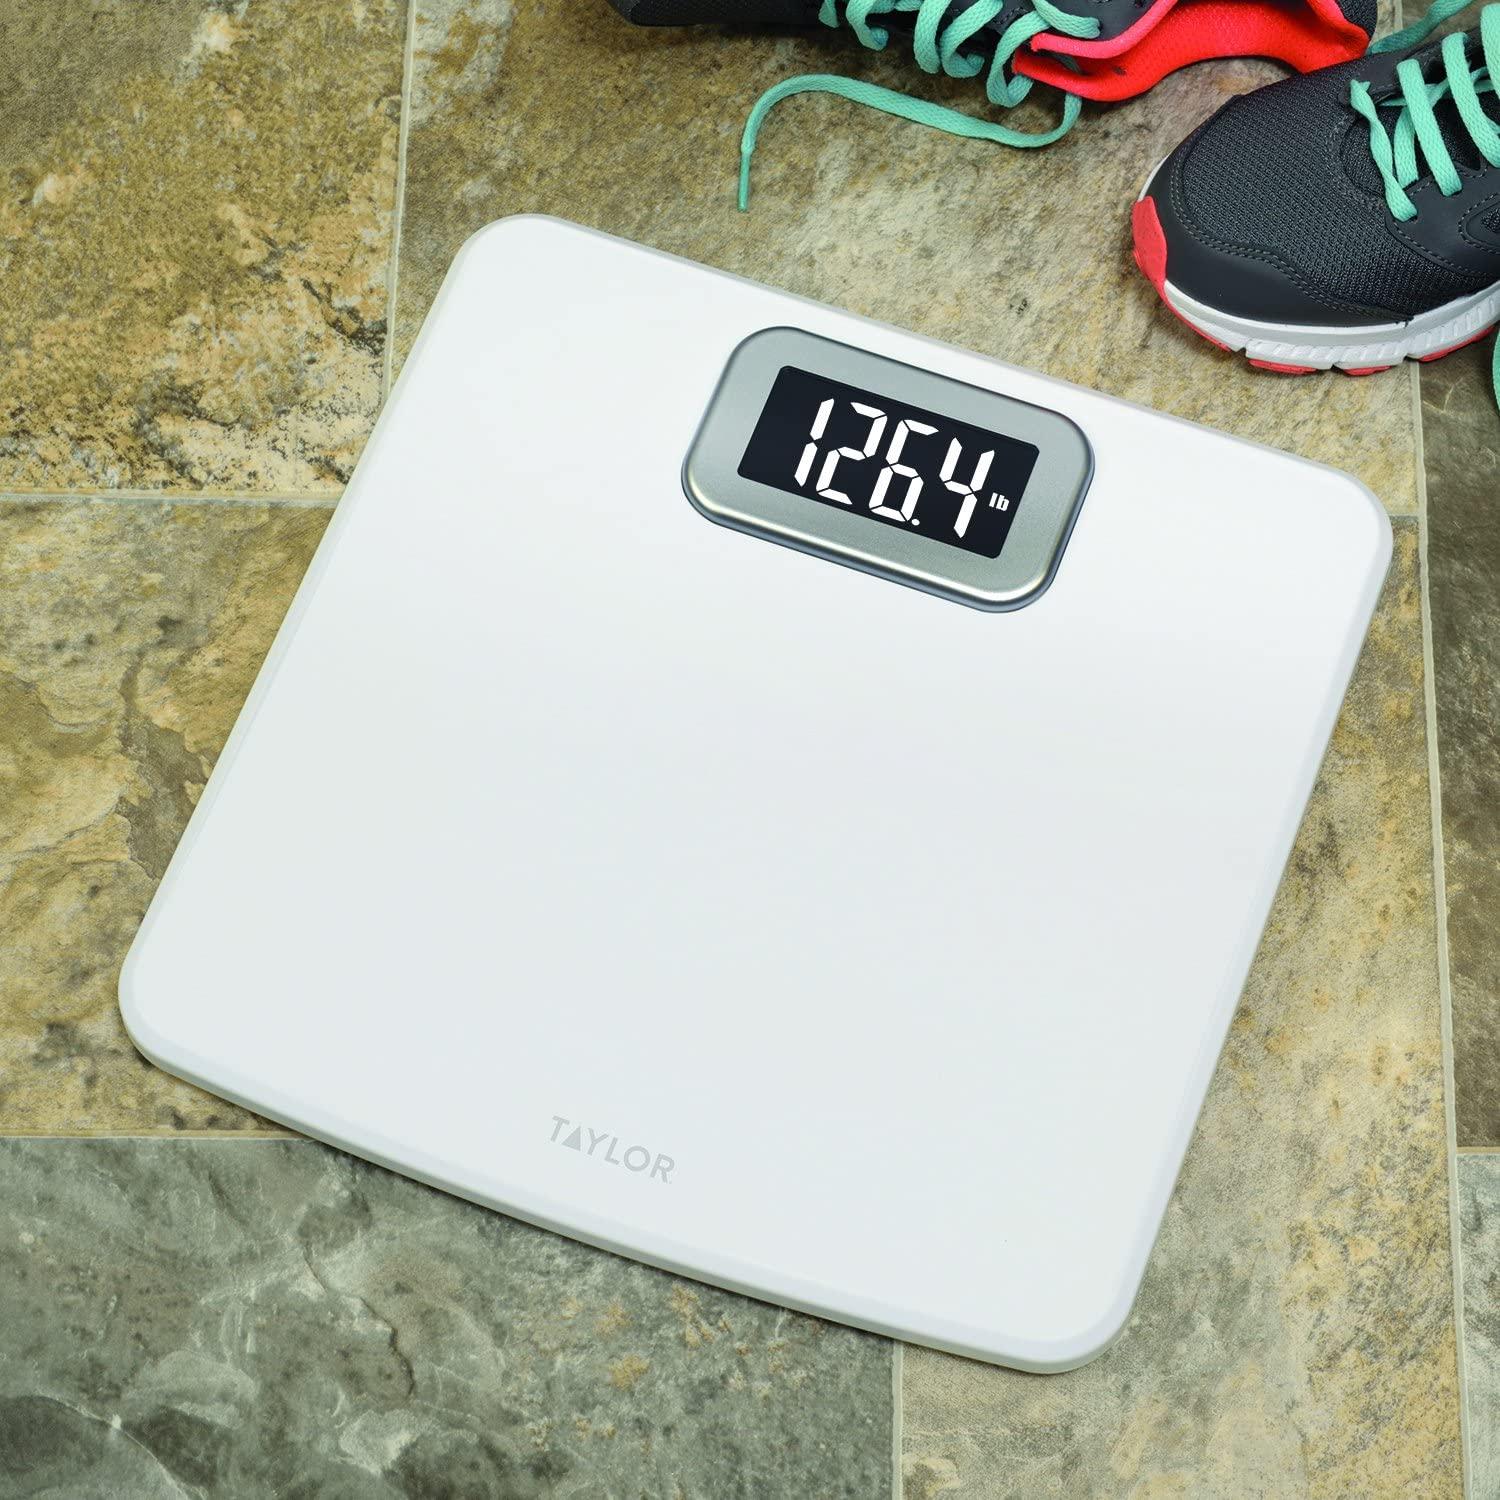 Taylor Glass Body Composition Scale with 400 lb Capacity